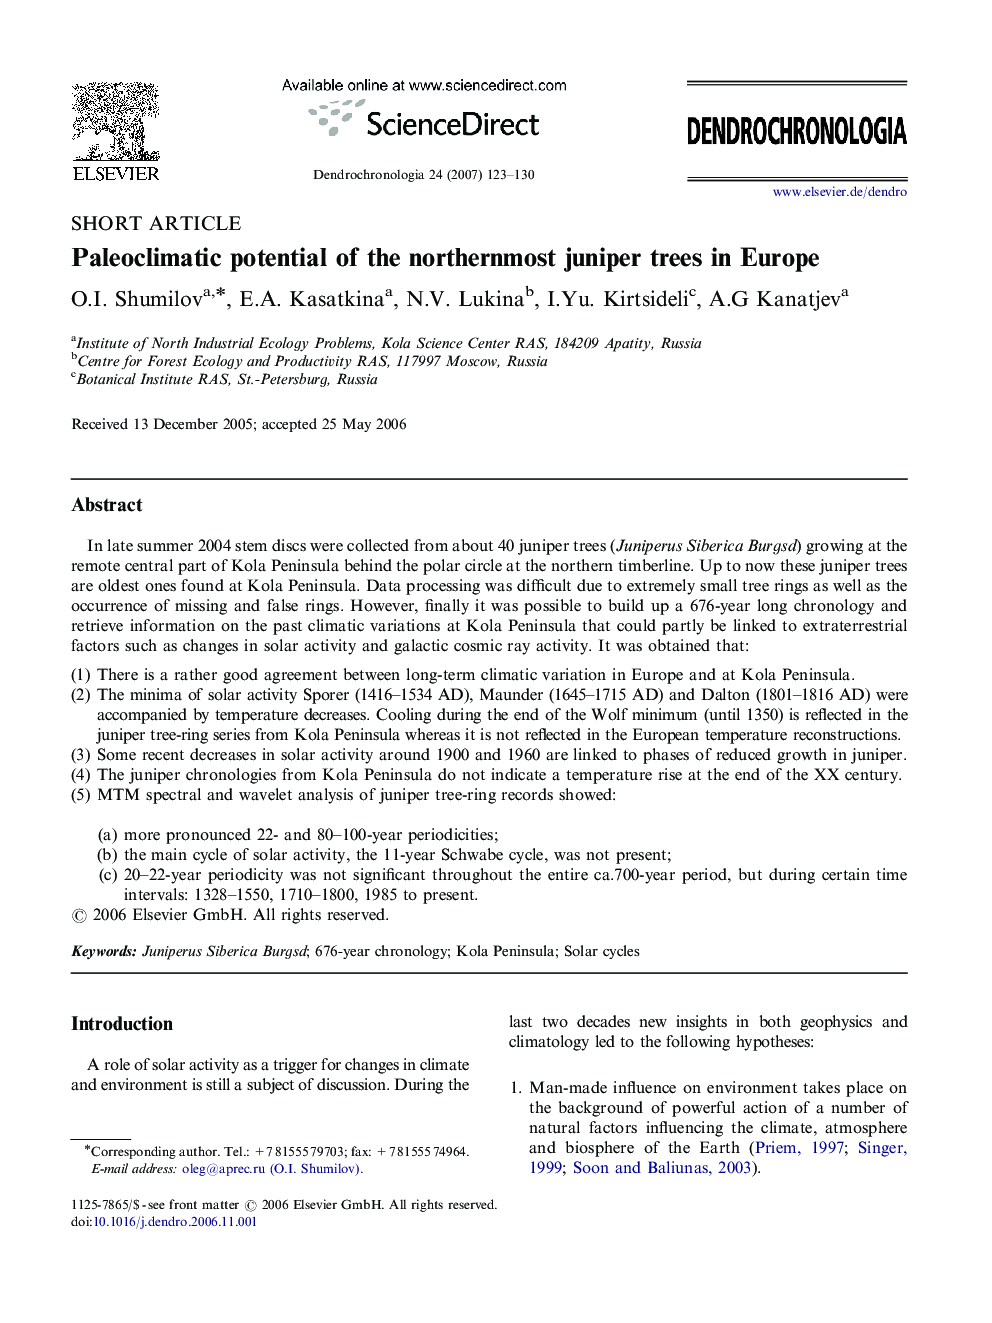 Paleoclimatic potential of the northernmost juniper trees in Europe